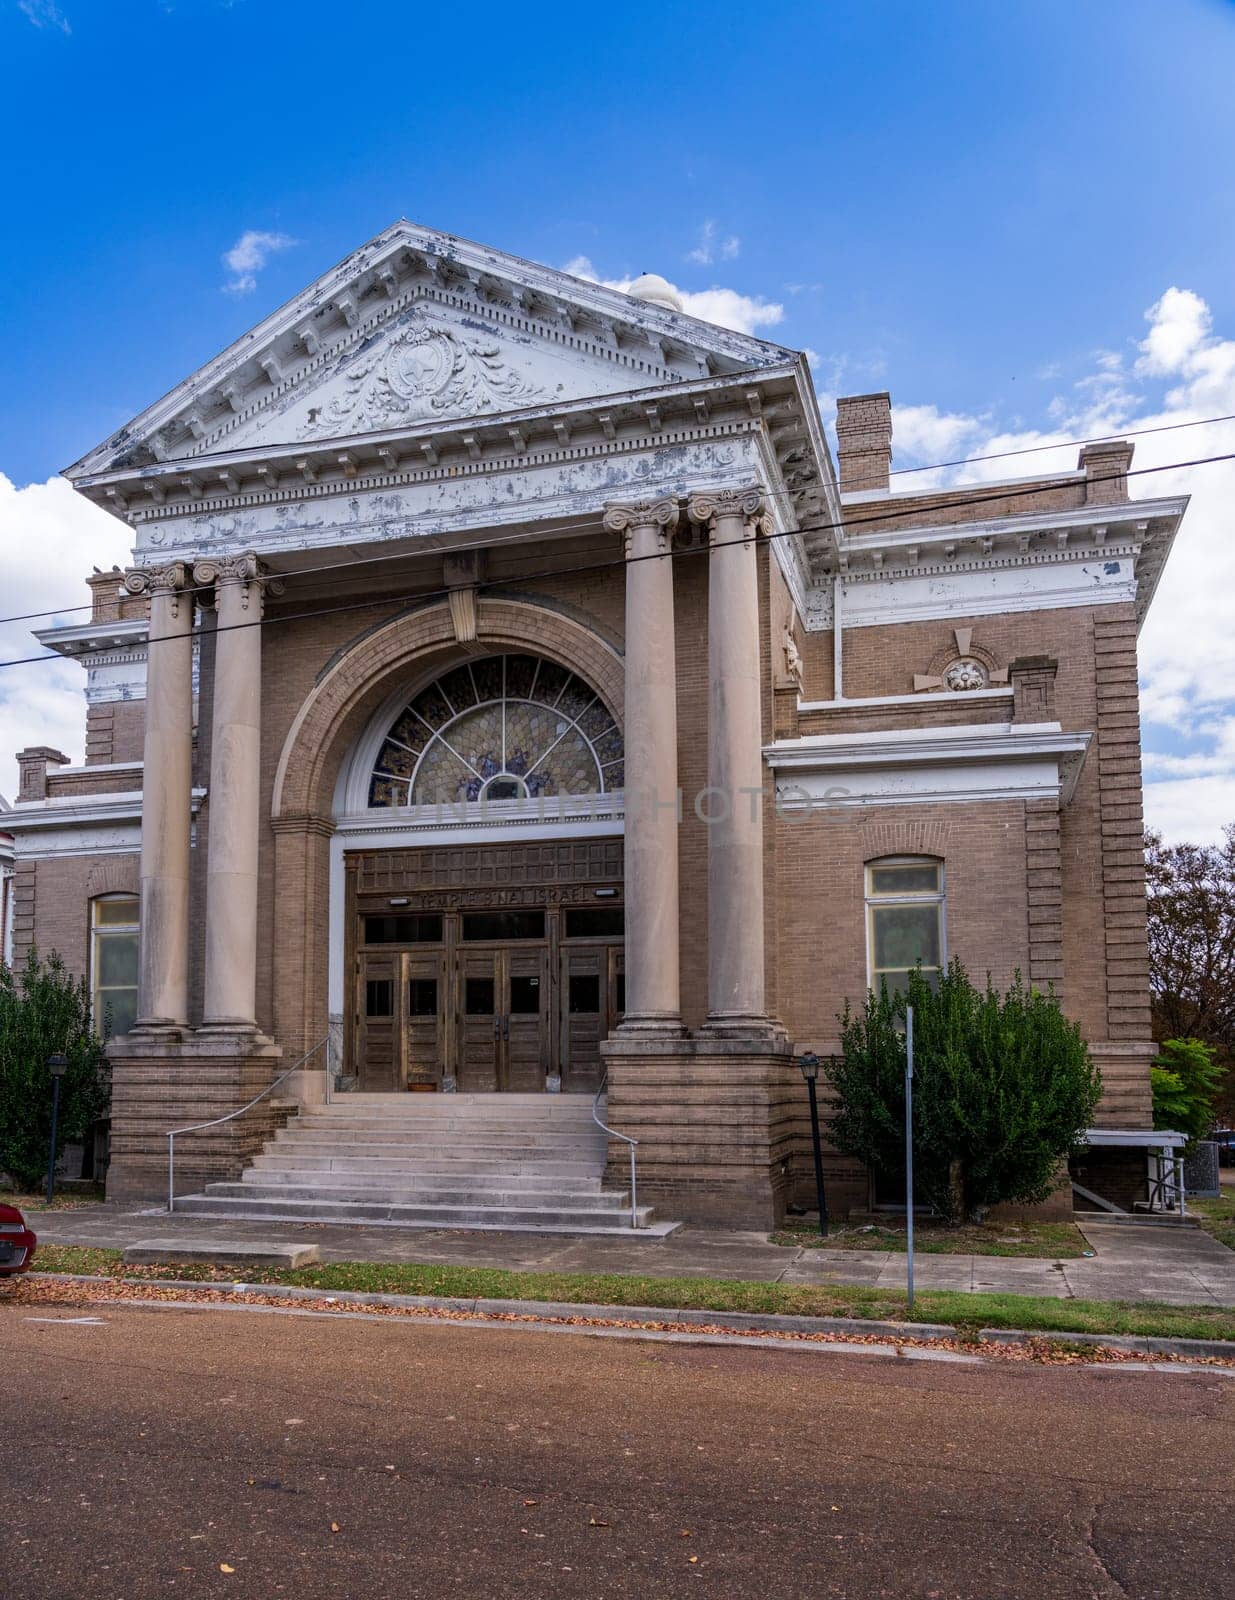 Exterior of Jewish Synagogue in Natchez in Mississippi by steheap